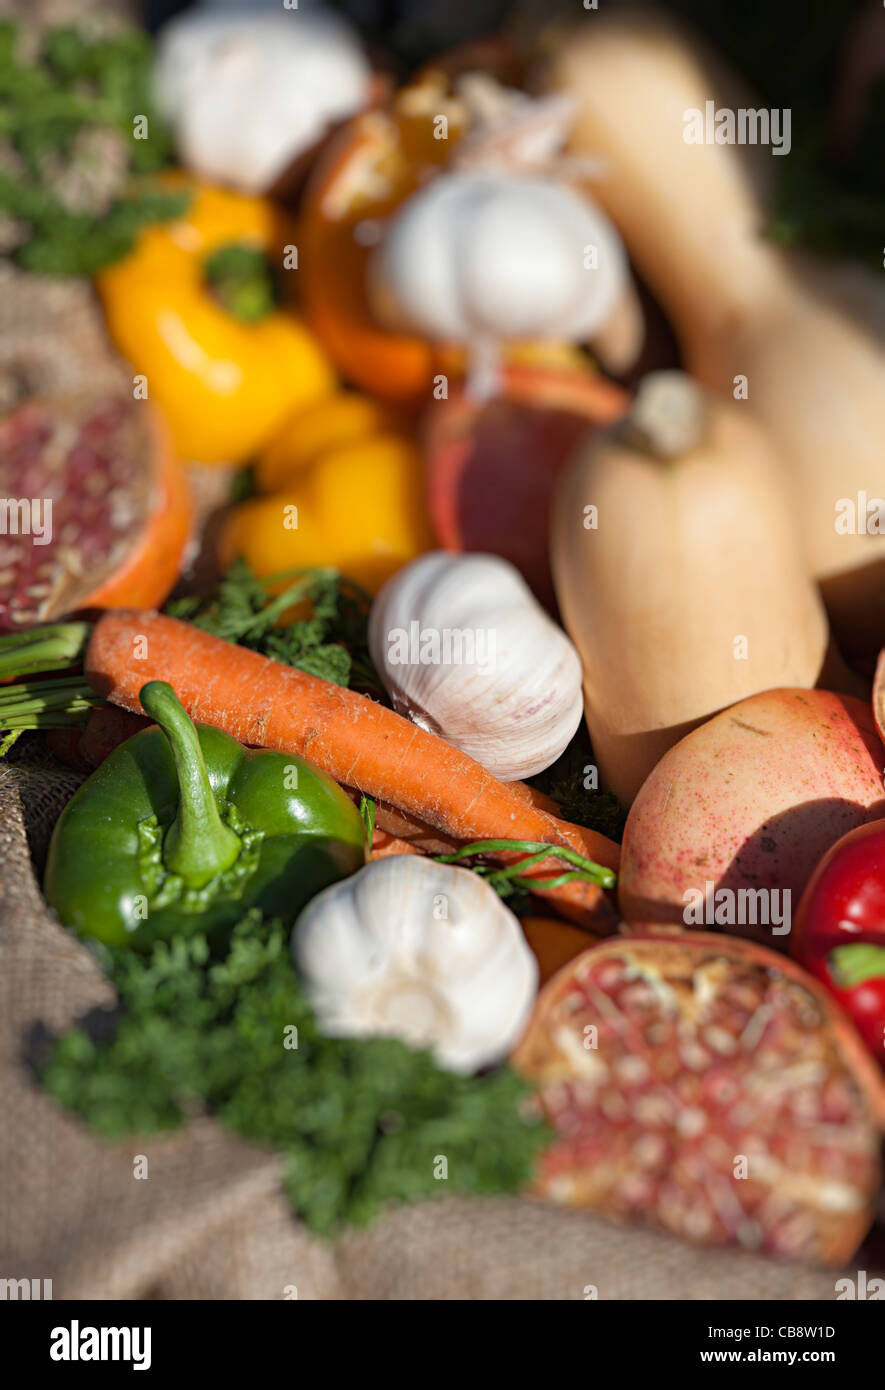 Selection of vegetables in market display Wales UK Stock Photo